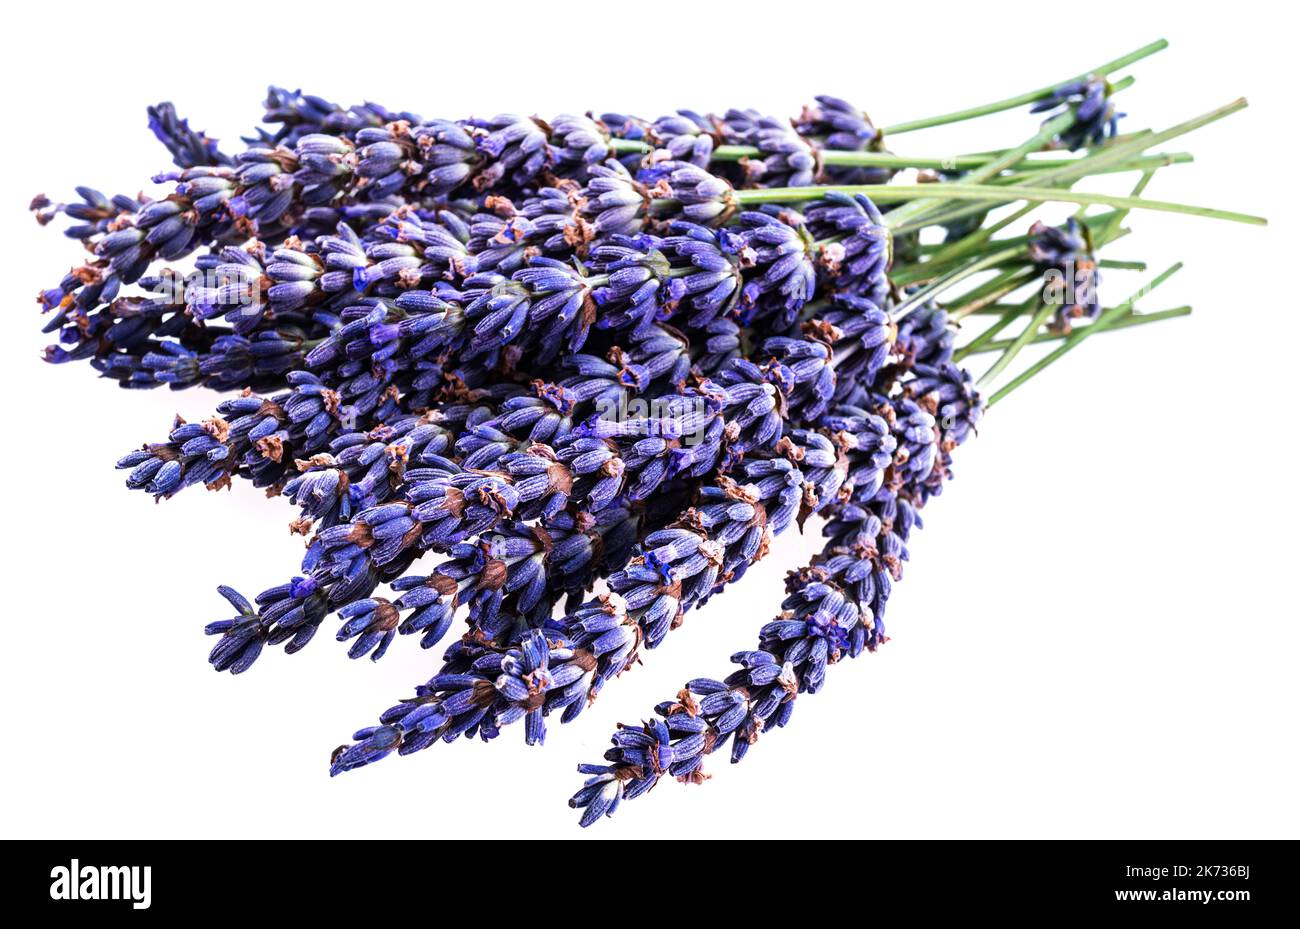 Bouquet of lavender flowers closeup isolated on white background. Stock Photo